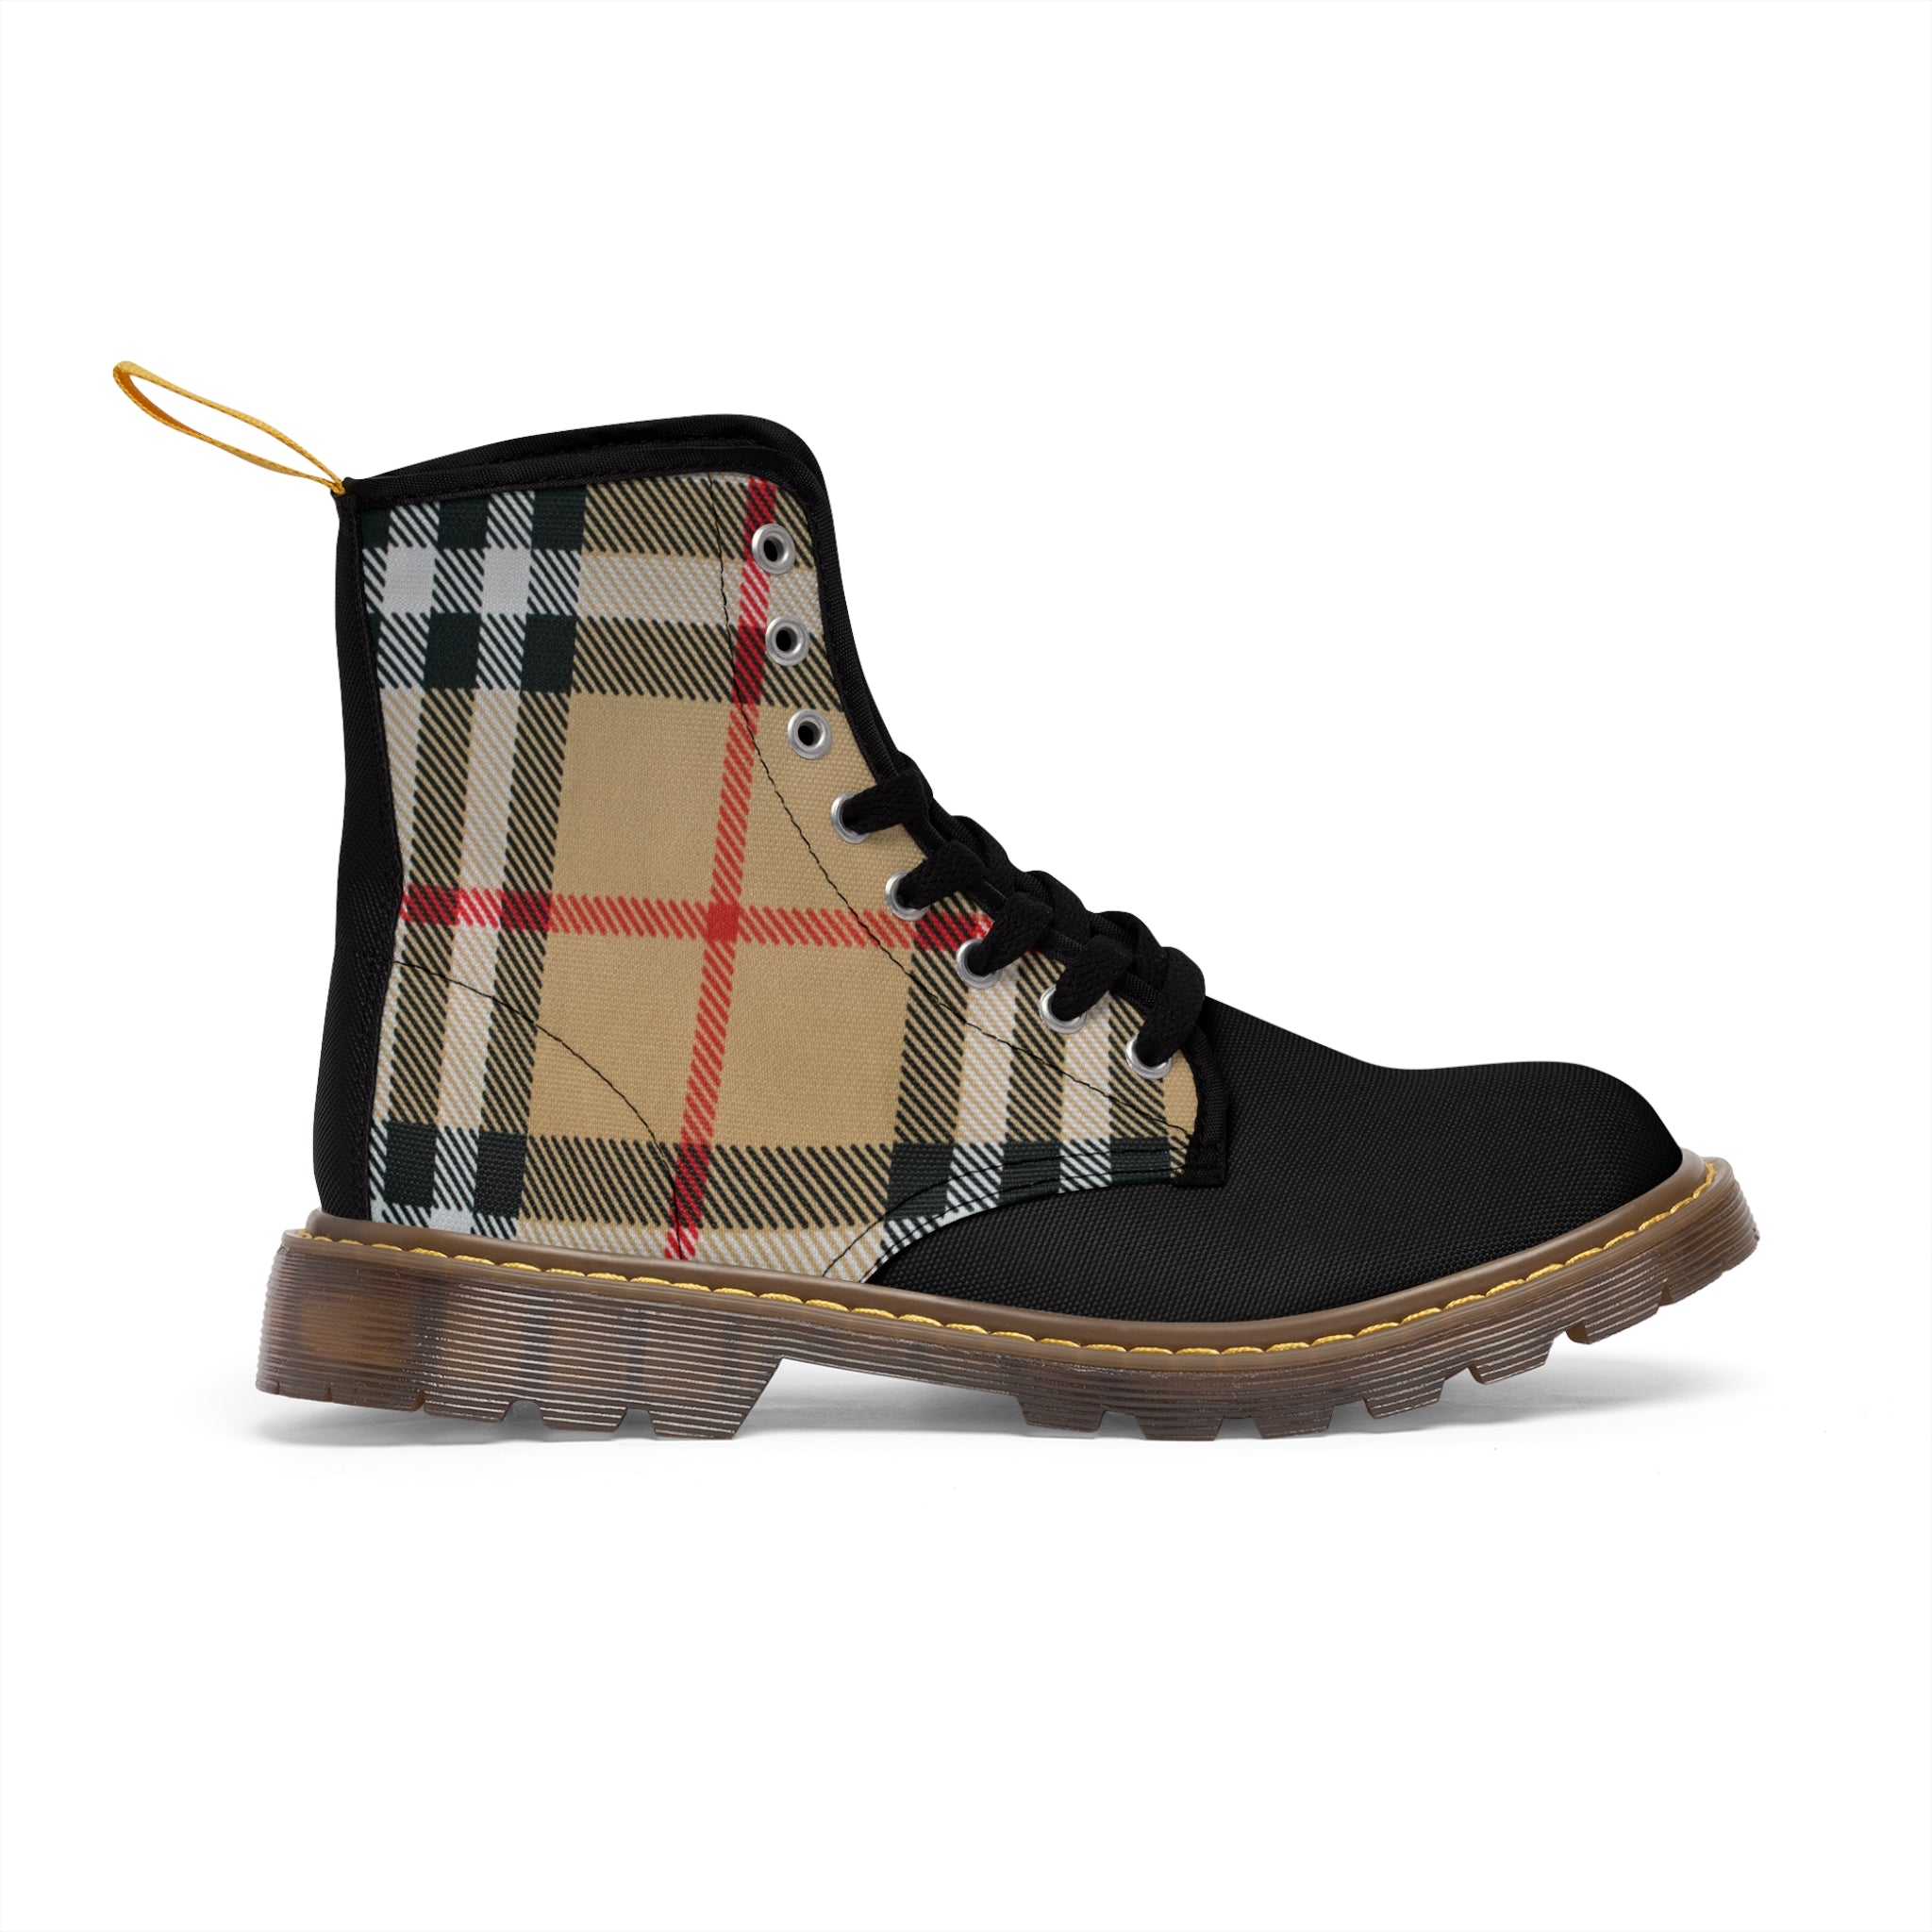  Groove Collection Dark Plaid Women's Canvas Boots BootsUS11Brownsole